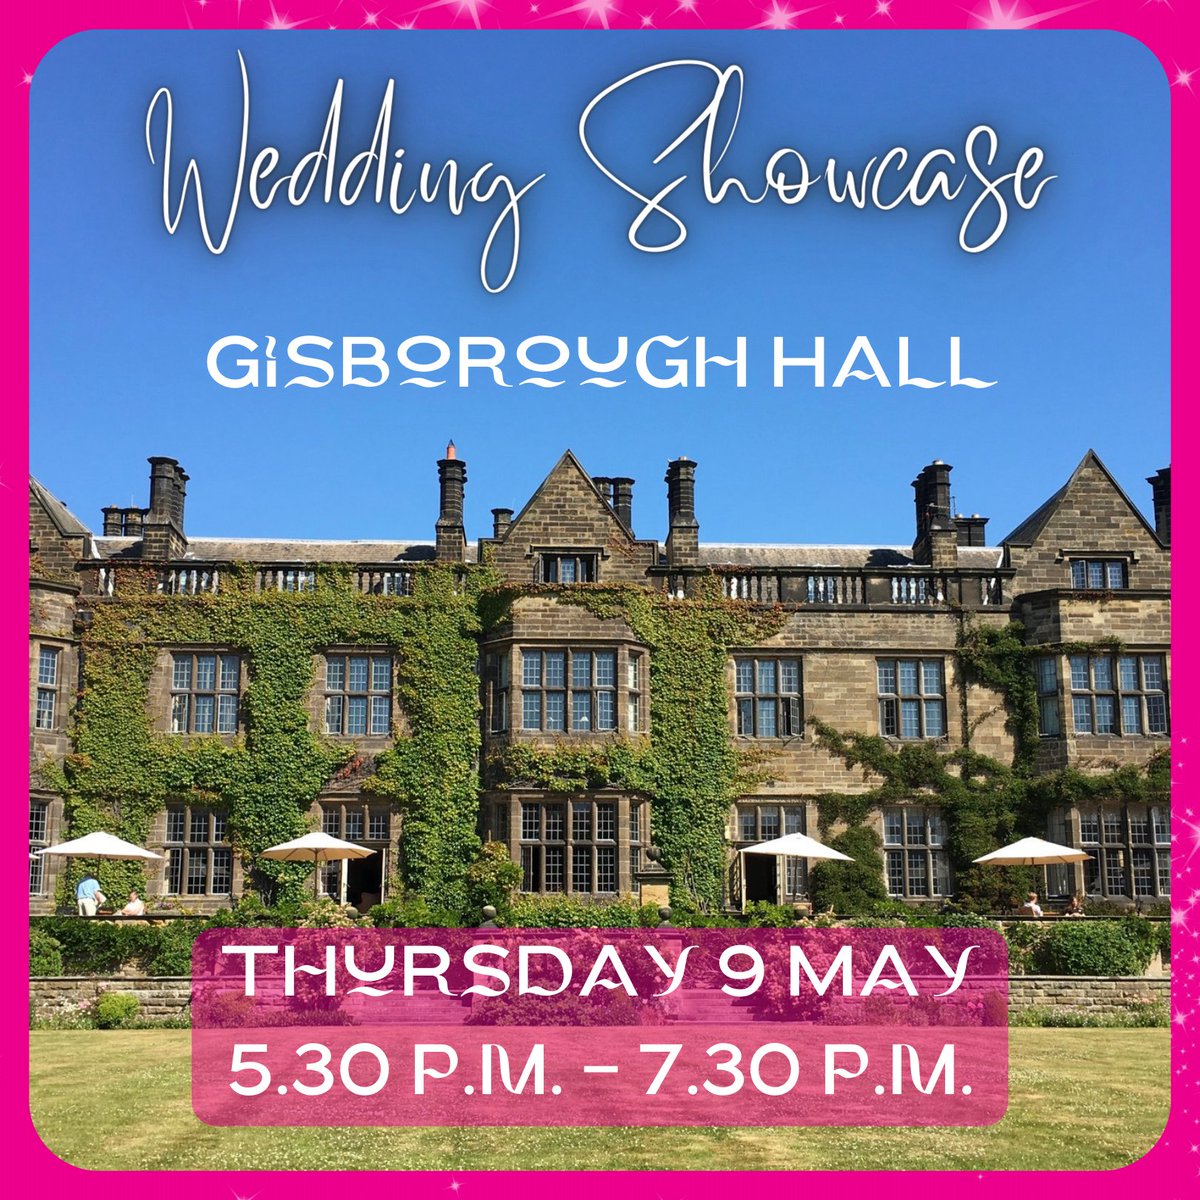 🎉 Join us at @GisboroughHall's Wedding Showcase tomorrow, 9th May from 5:30-7:30pm and chat with our amazing entertainment team! 💍 💃 Get ready for an evening of fun and wedding inspiration! 🤩 #WeddingShowcase #WeddingGoals #EntertainmentTeam #JoinTheFun #SayIDo #SaveTheDate